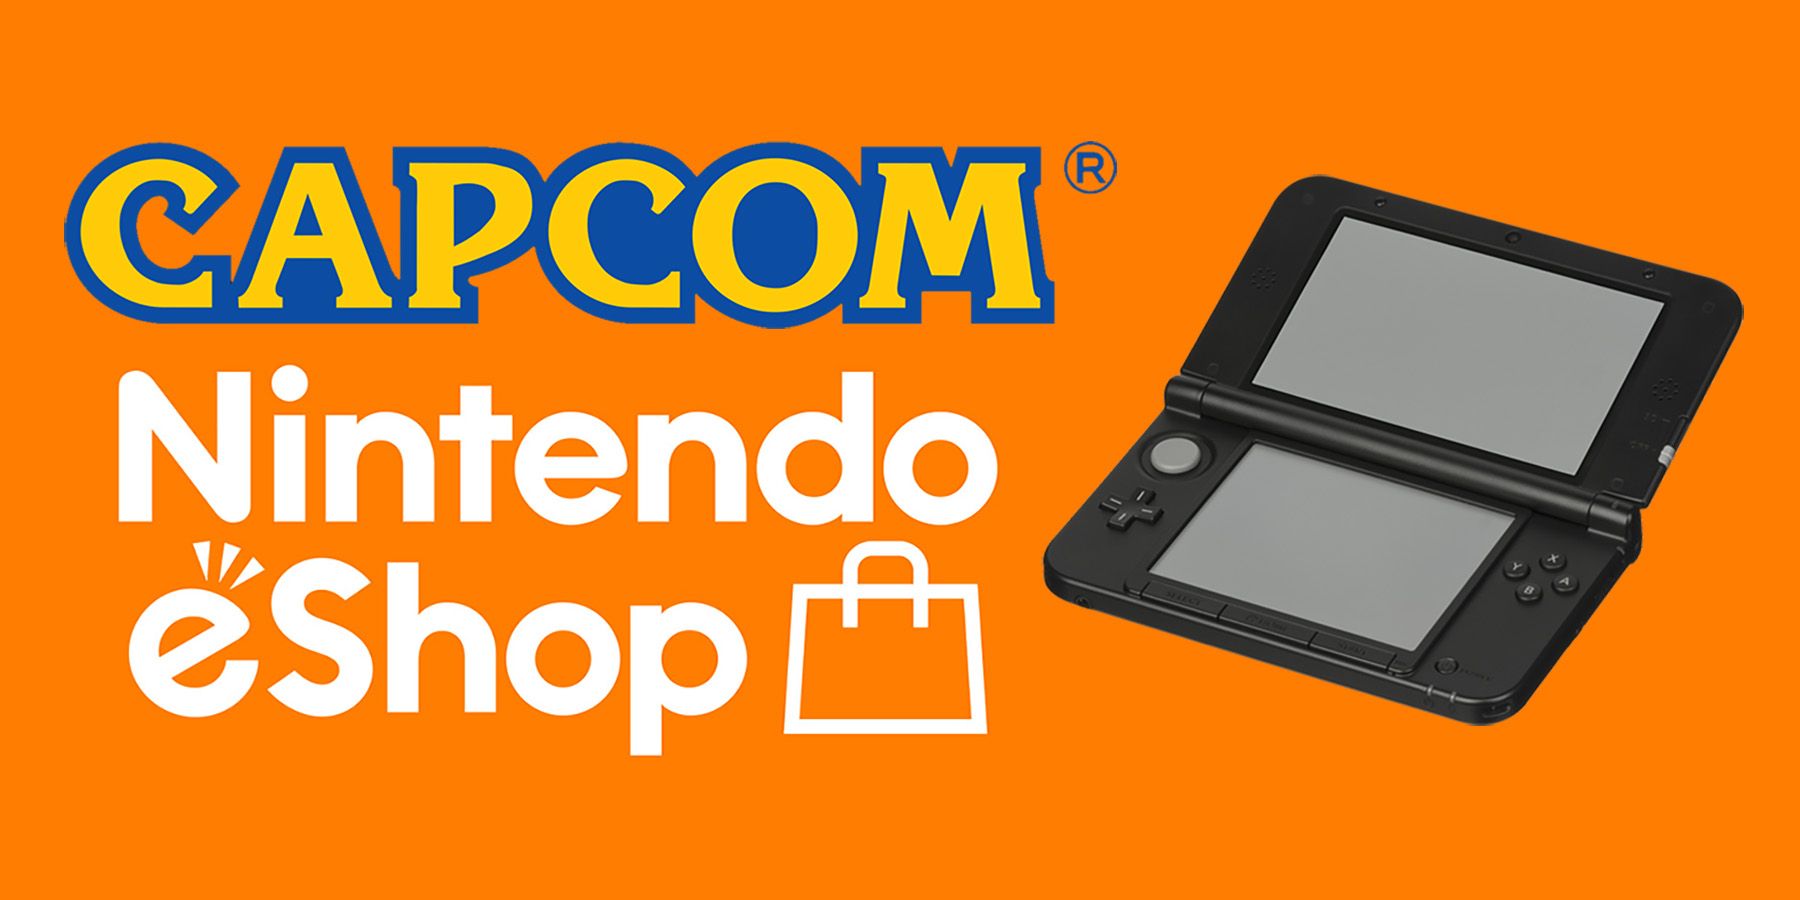 lort Vædde veltalende Capcom Slashes Eshop Prices by Up to 90% Before Store Closes Down